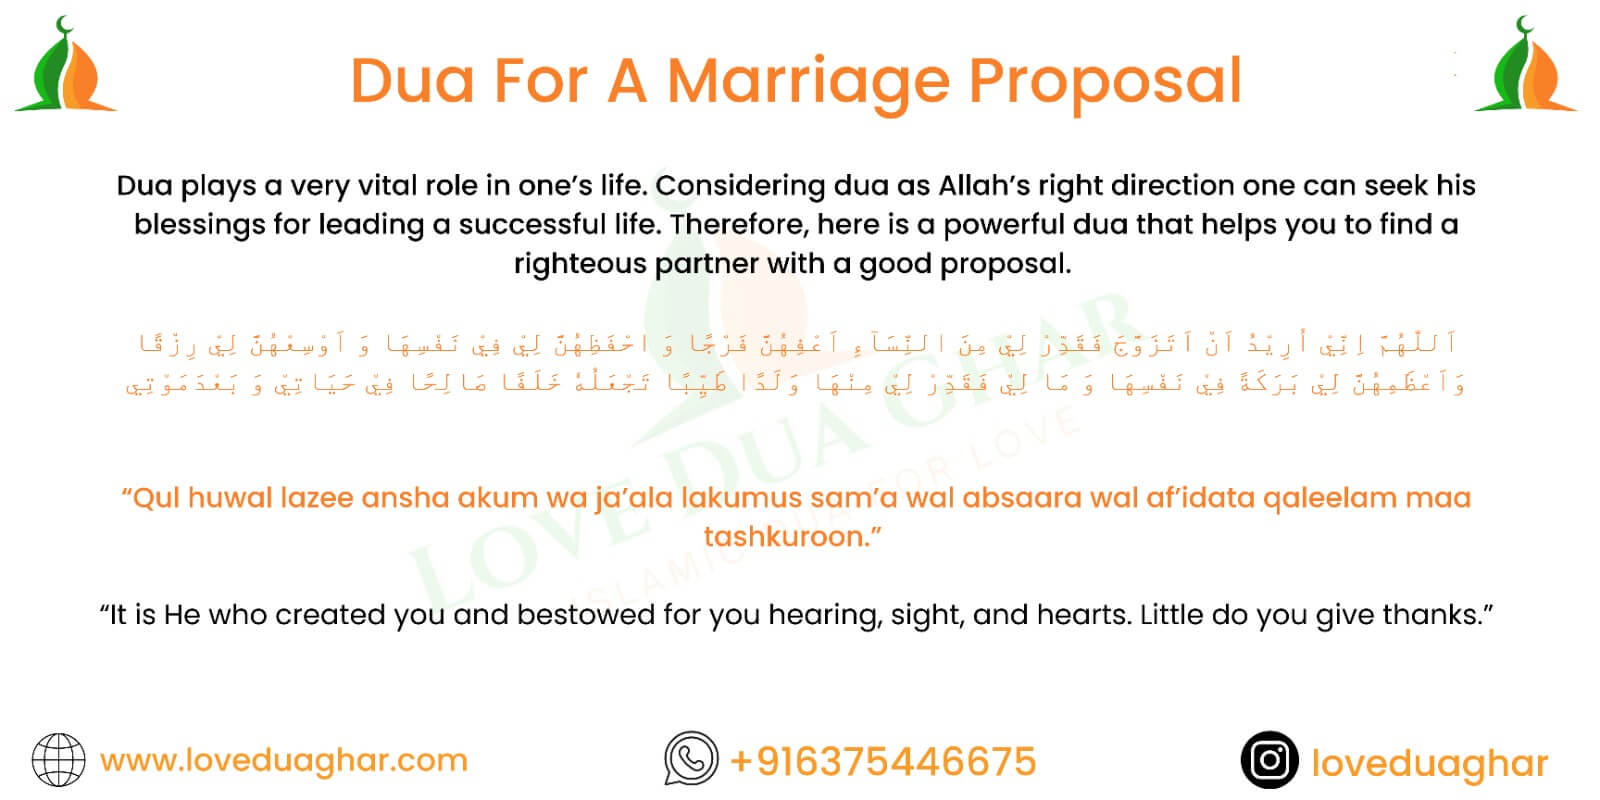 Dua For A Marriage Proposal